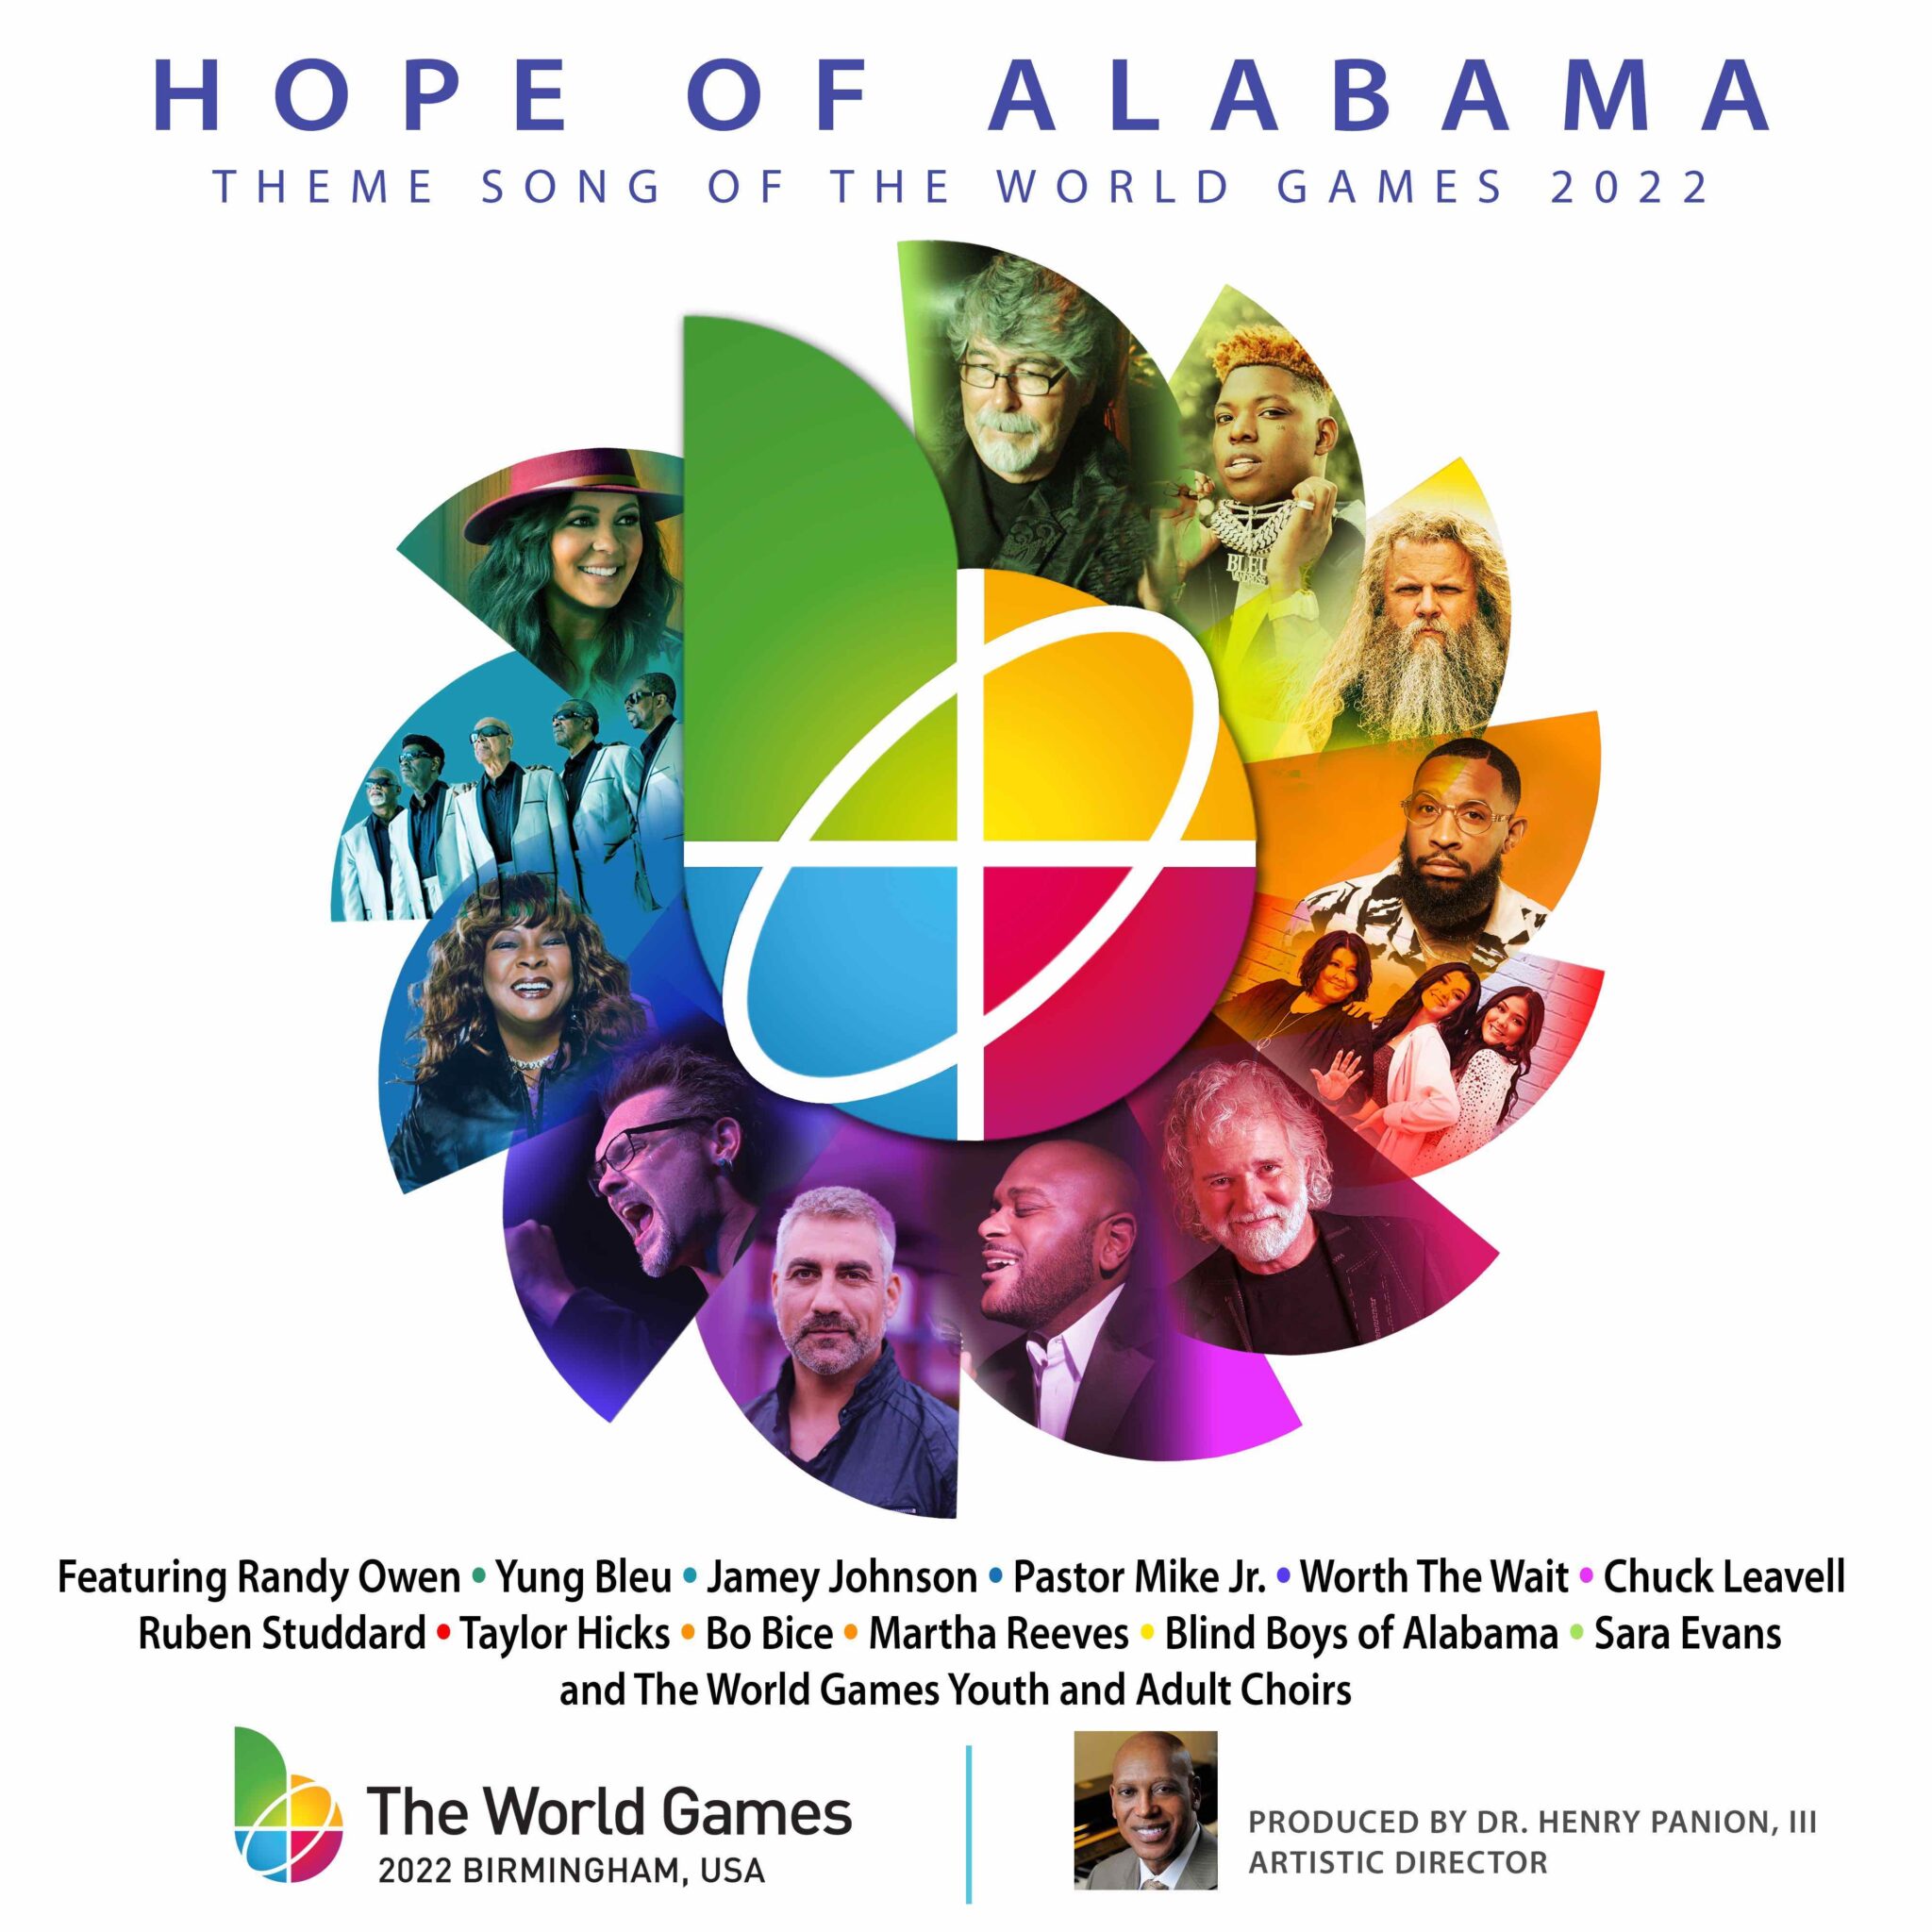 Hope of Alabama Cover Art 3 7 reasons you don't want to miss The World Games 2022 Opening + Closing Ceremonies, July 7 & 17